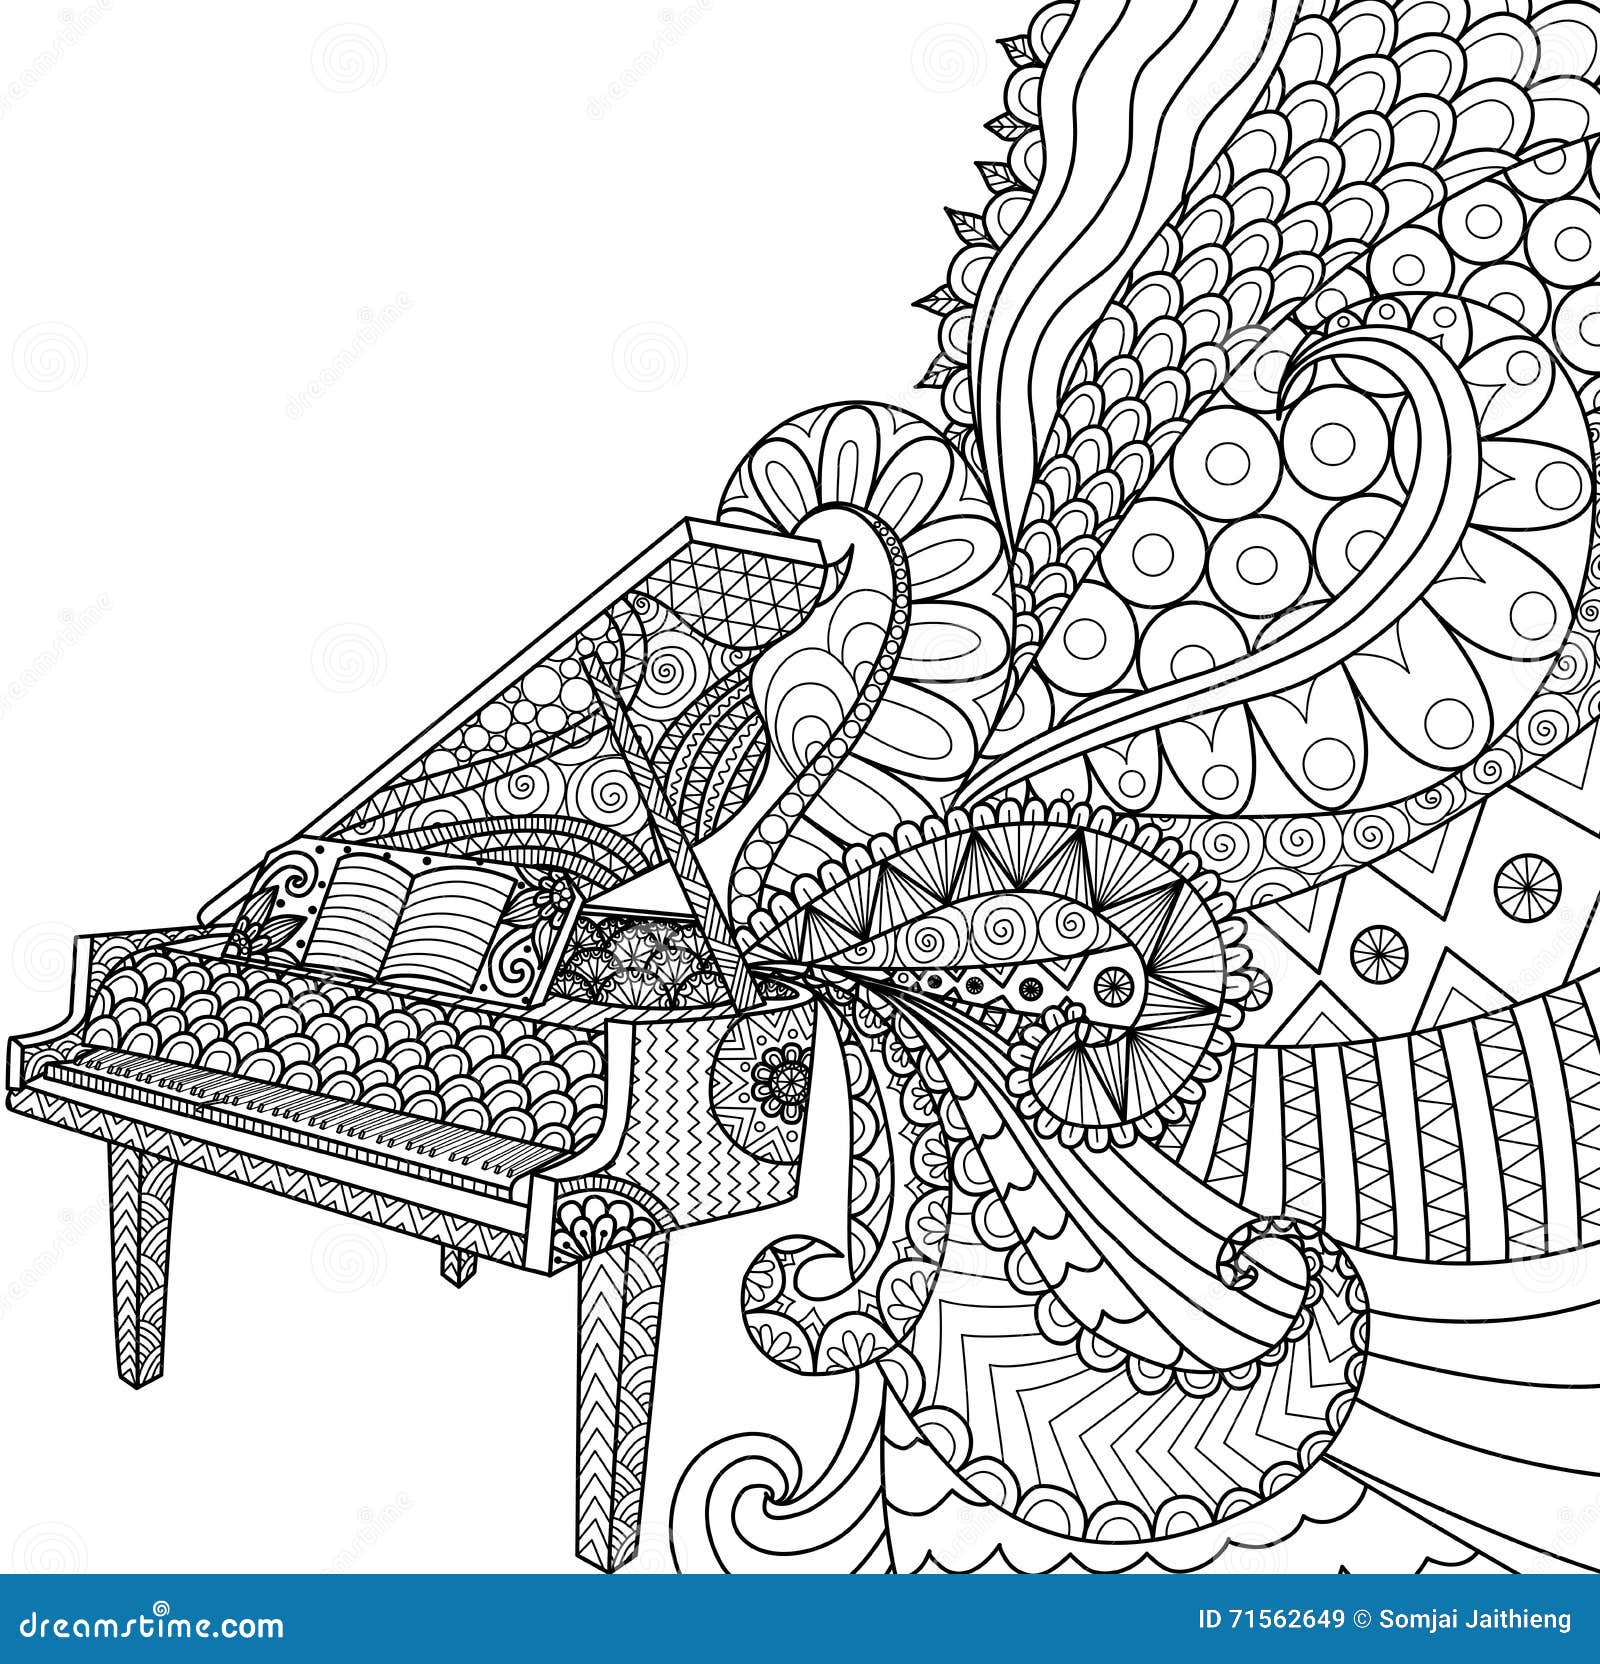 doodles  of piano for coloring book for adult, poster, cards,  , t- shirt graphic and so on - stock